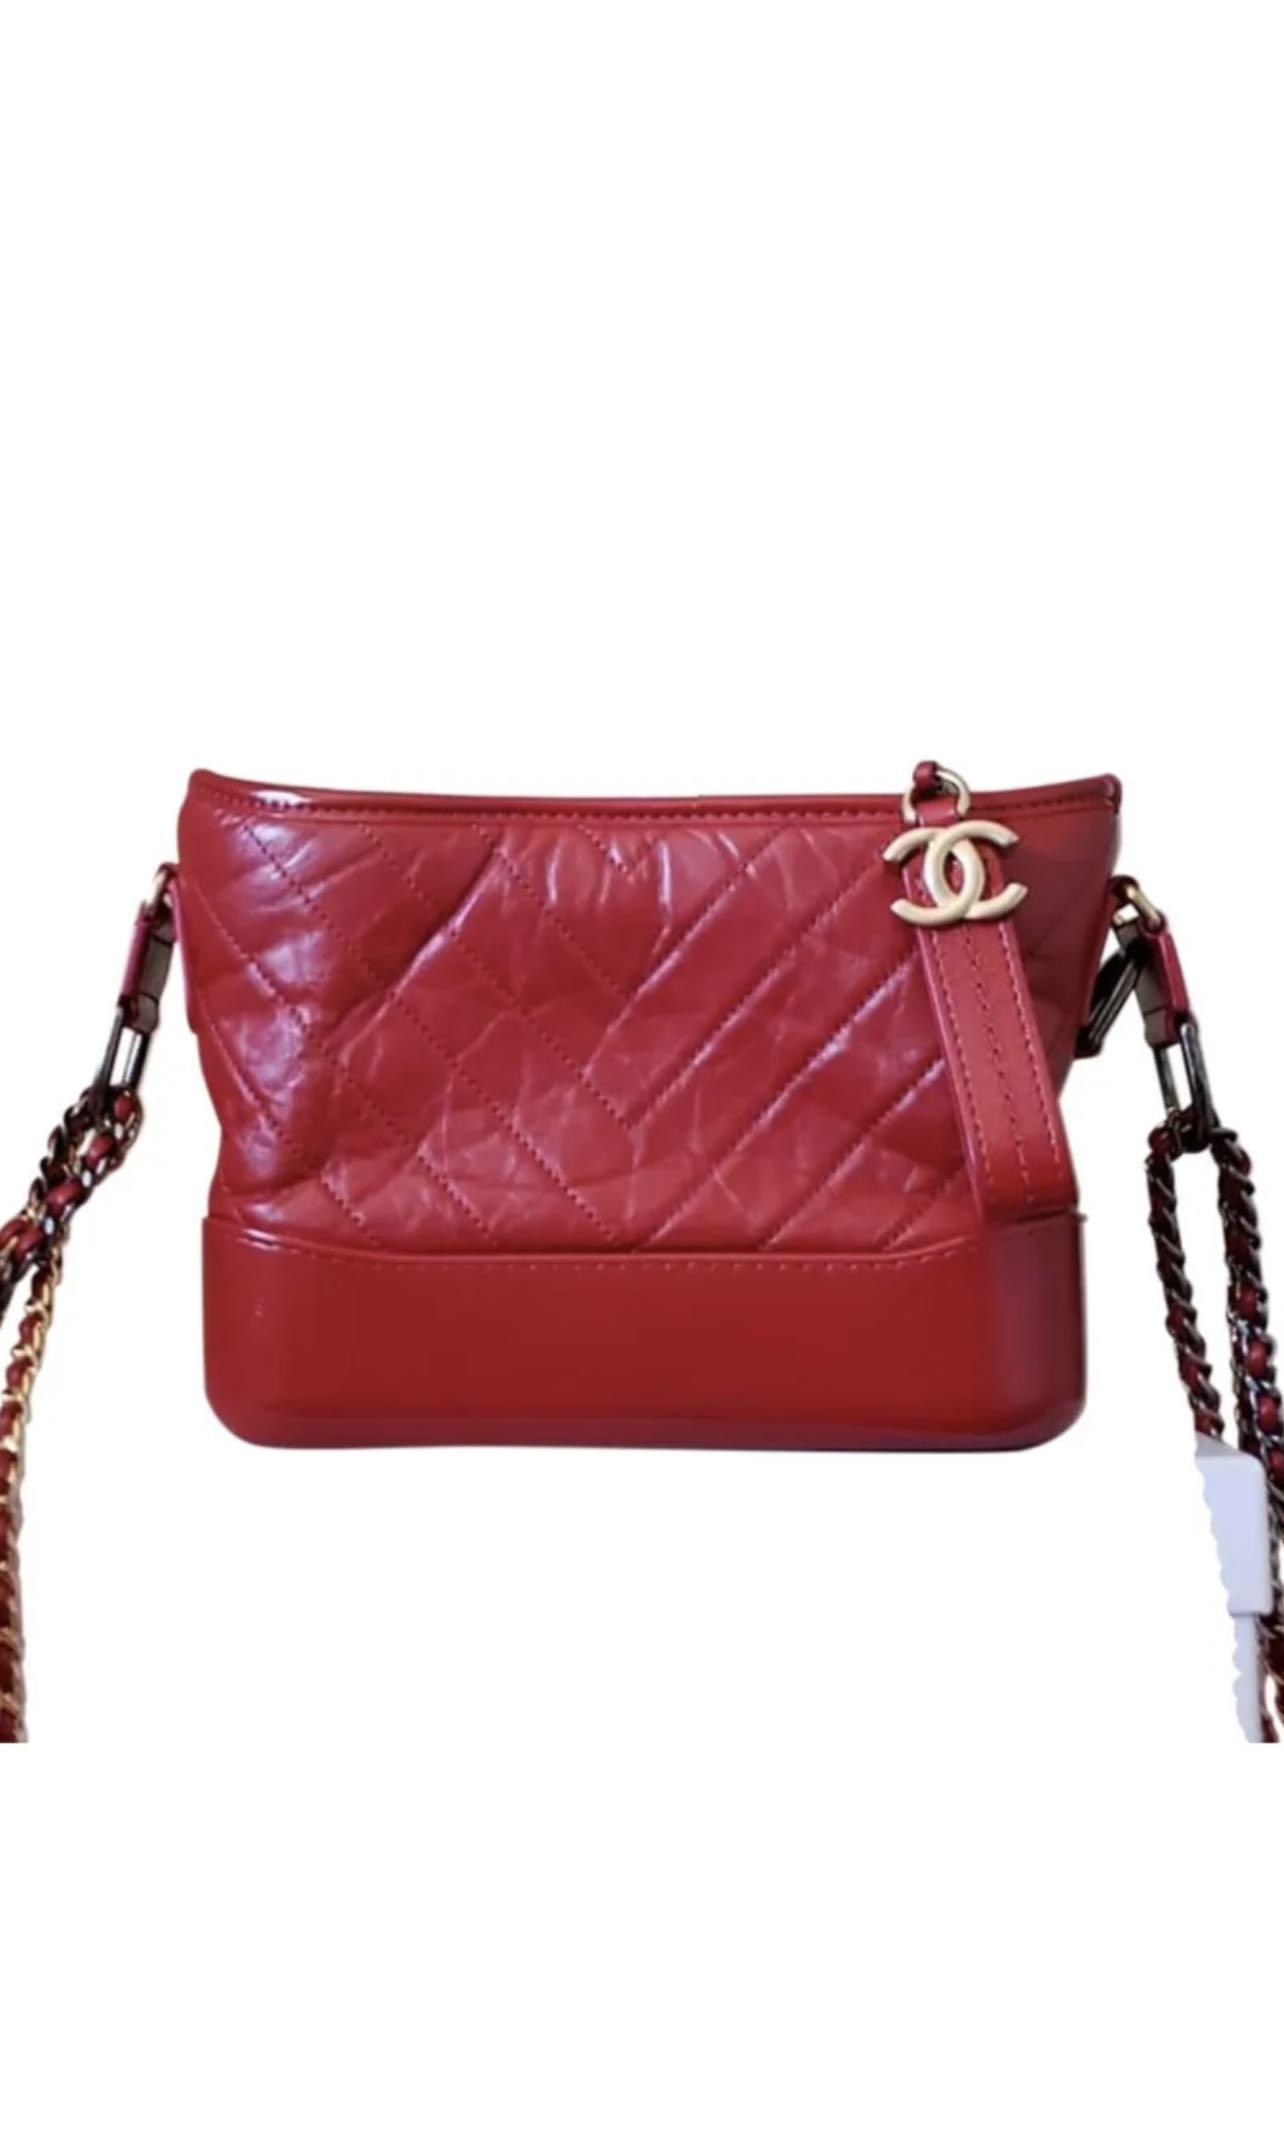 CHANEL'S GABRIELLE Small Hobo Bag In Aged Calfskin, Smooth